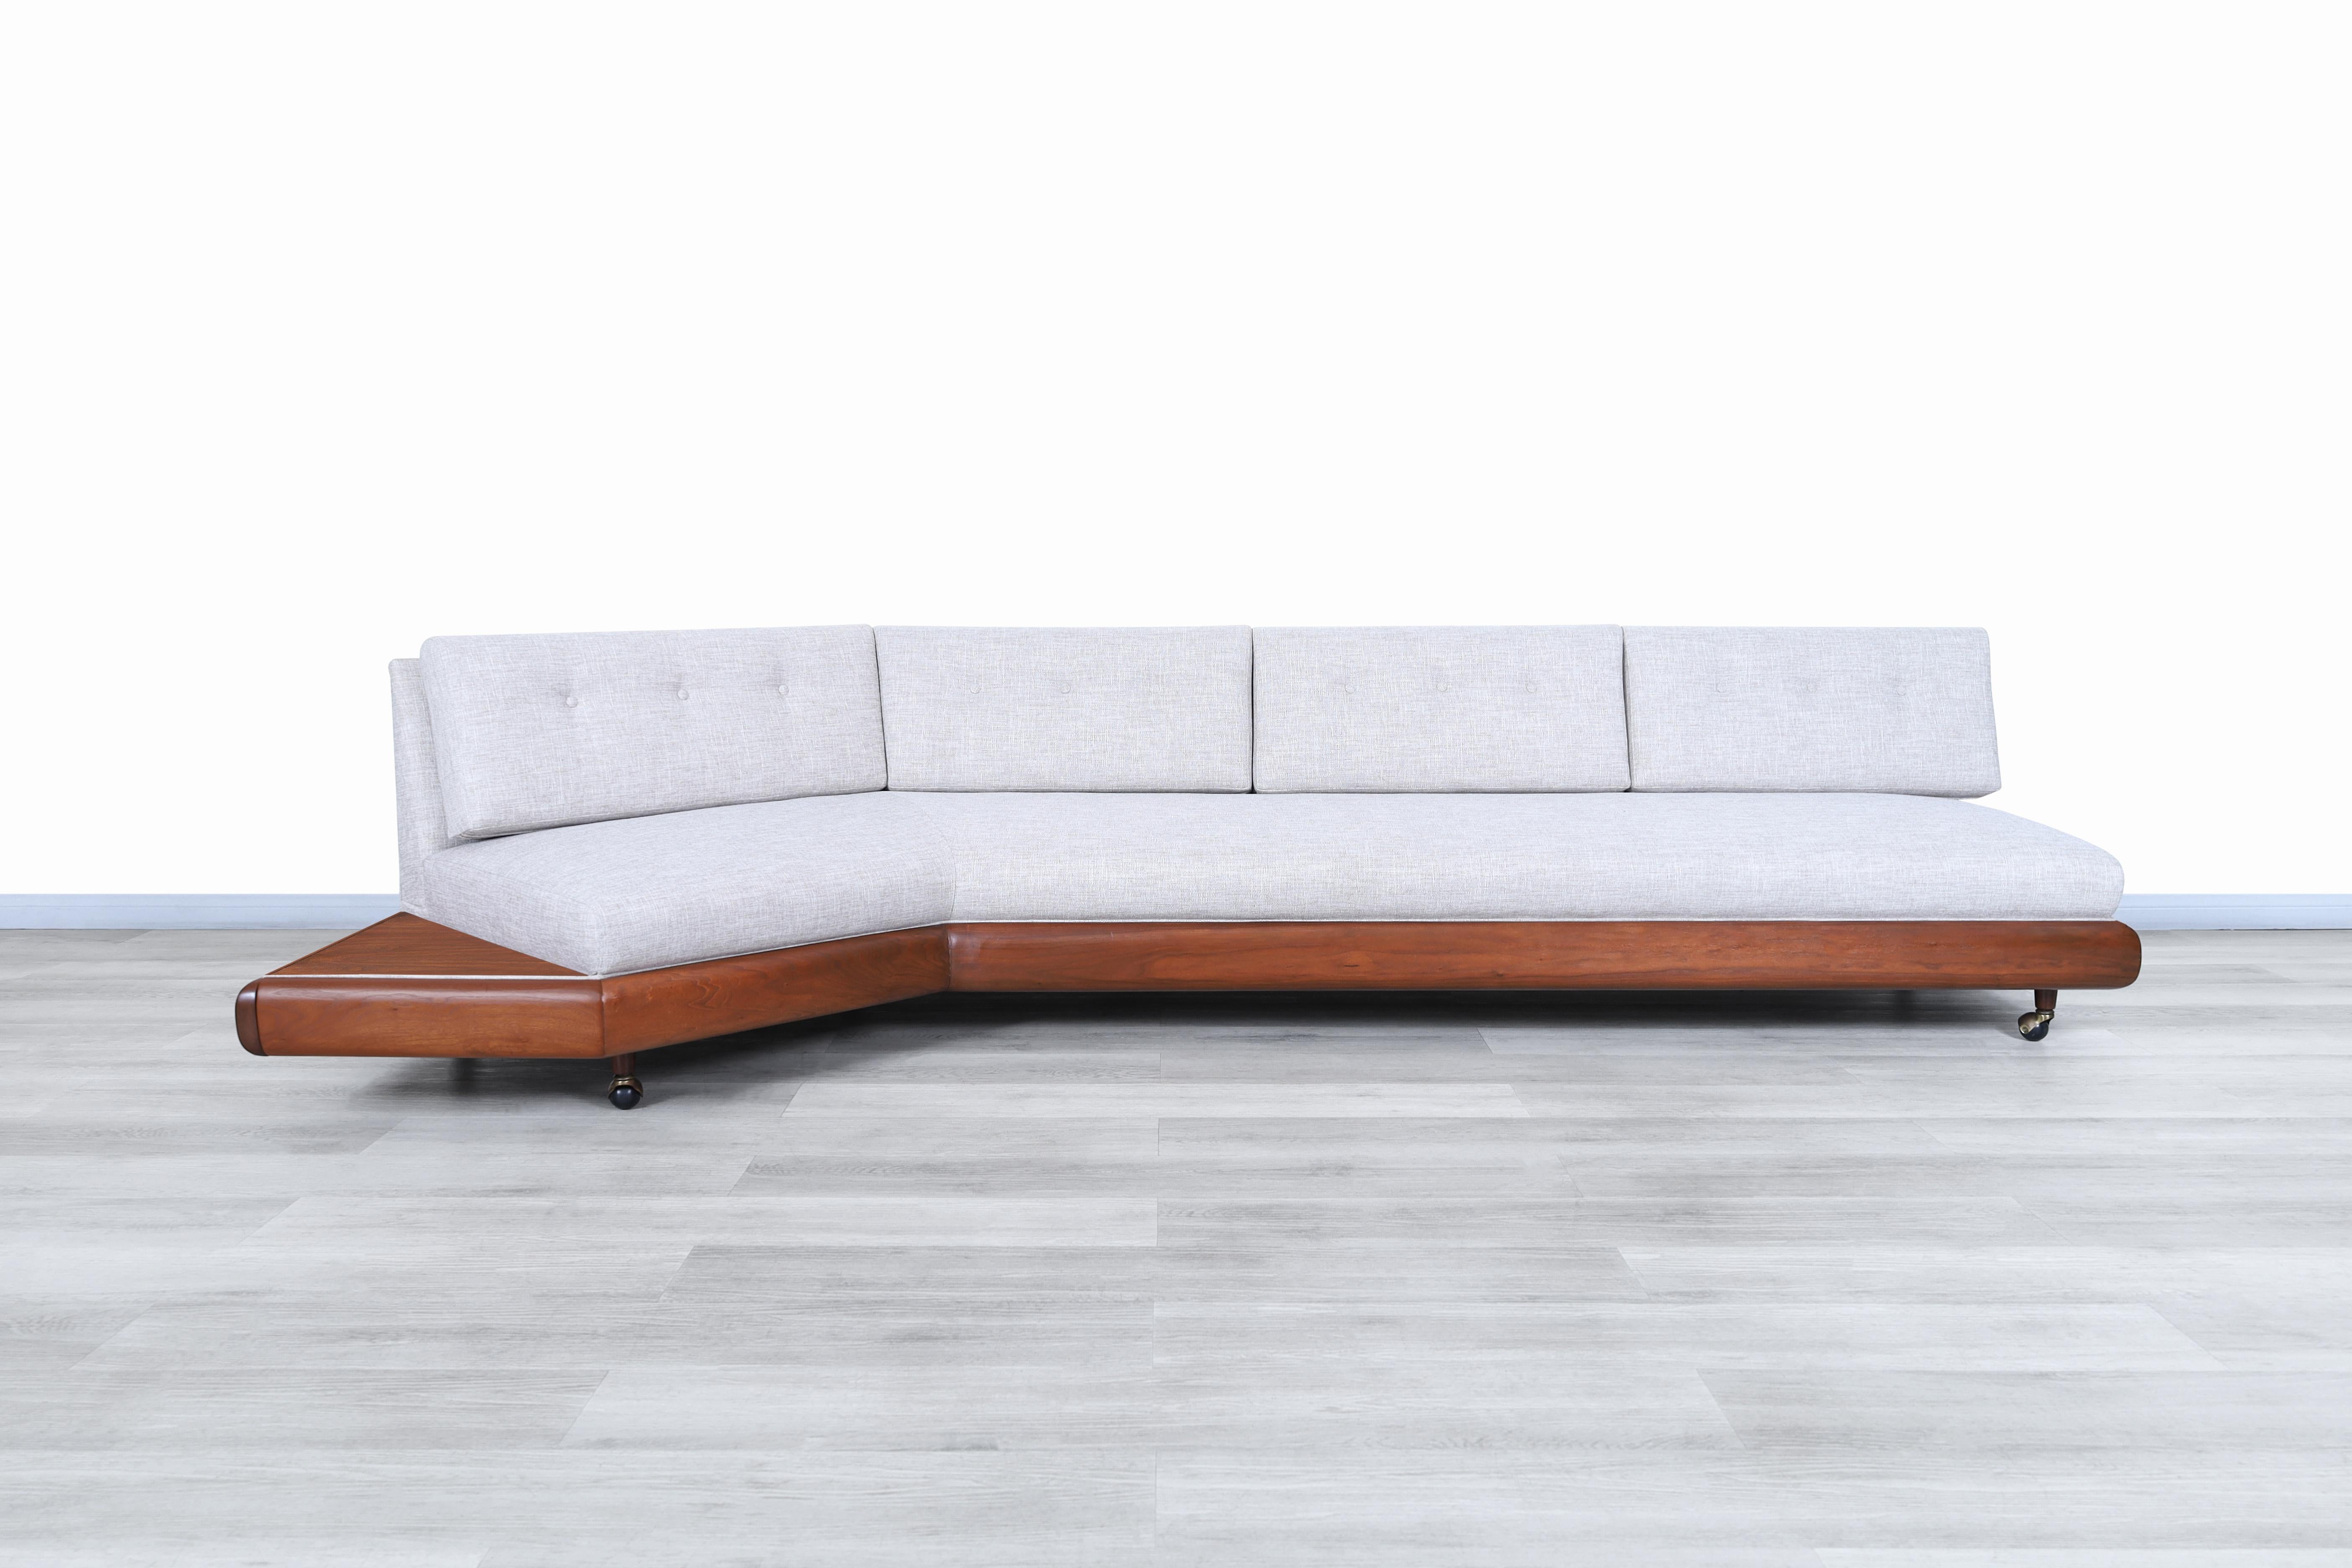 Stunning vintage walnut “Boomerang” sofa designed by Adrian Pearsall for Craft Associates in the United States, circa 1960s. This sofa has a structurally detailed design where the polygonal shape of its lines and the intricate construction details